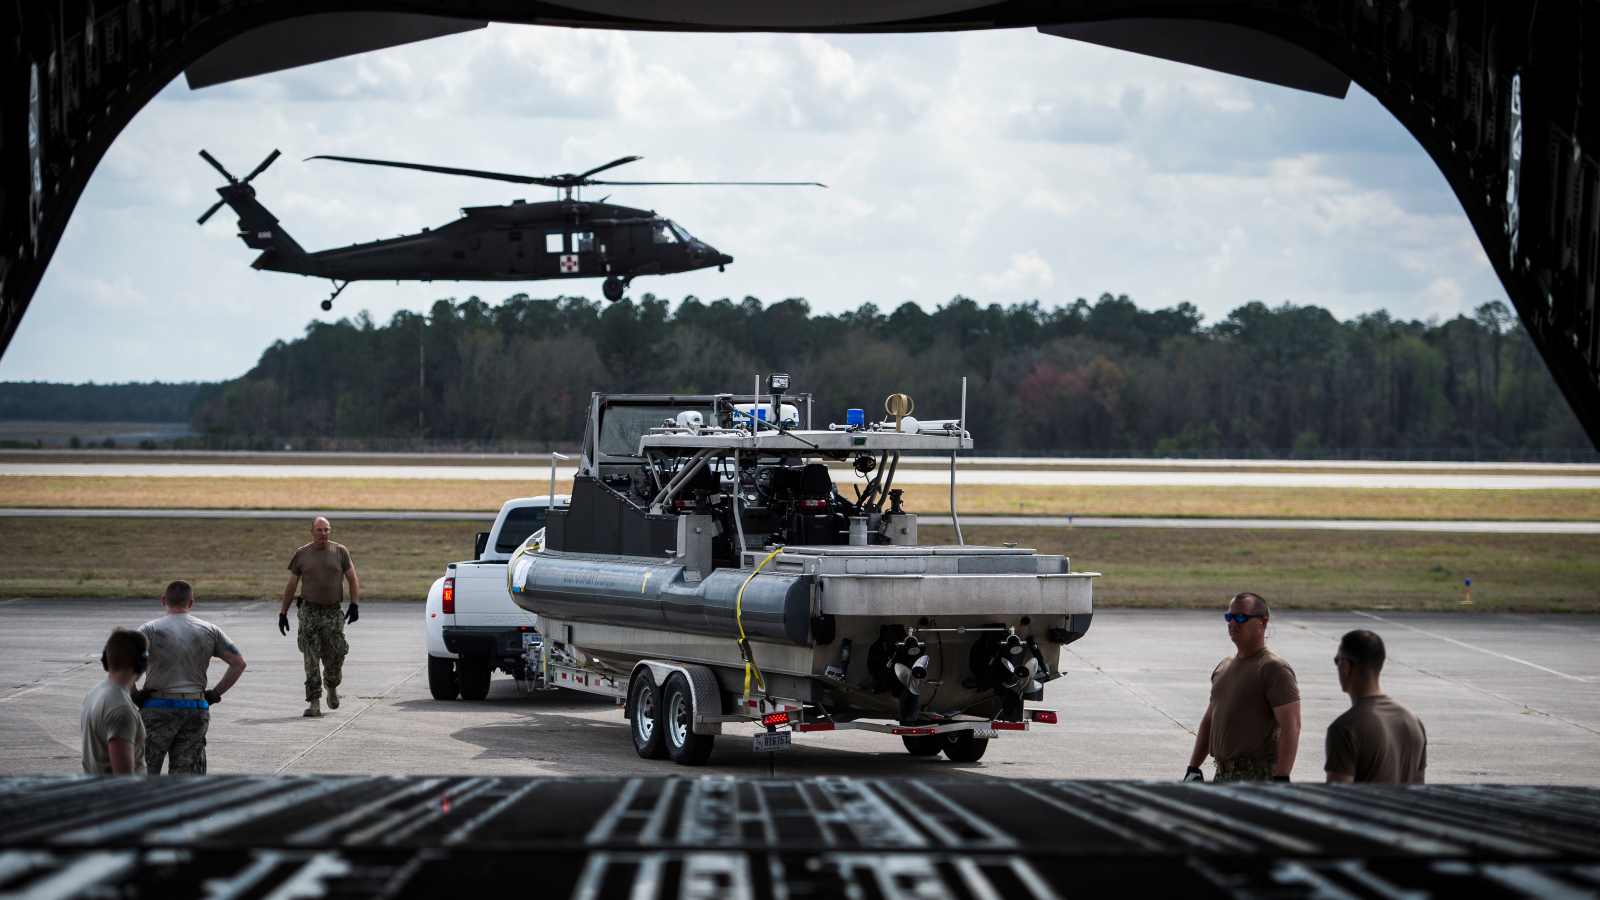 A U.S. Coast Guard boat is parked in position to be loaded onto an Air Force C-17 Globemaster, as an Army UH-60 Black Hawk prepares to land during Exercise Patriot Sands, Naval Air Station Cecil Field, Florida, Feb. 22, 2019. Exercise Patriot Sands is a joint-service exercise coordinated by the Air Force Reserve, designed to integrate first responders from federal, state, local agencies and the military by providing quick response training in the event of a regional emergency or natural disaster. (U.S. Air Force photo by Tech. Sgt. Larry E. Reid Jr.)